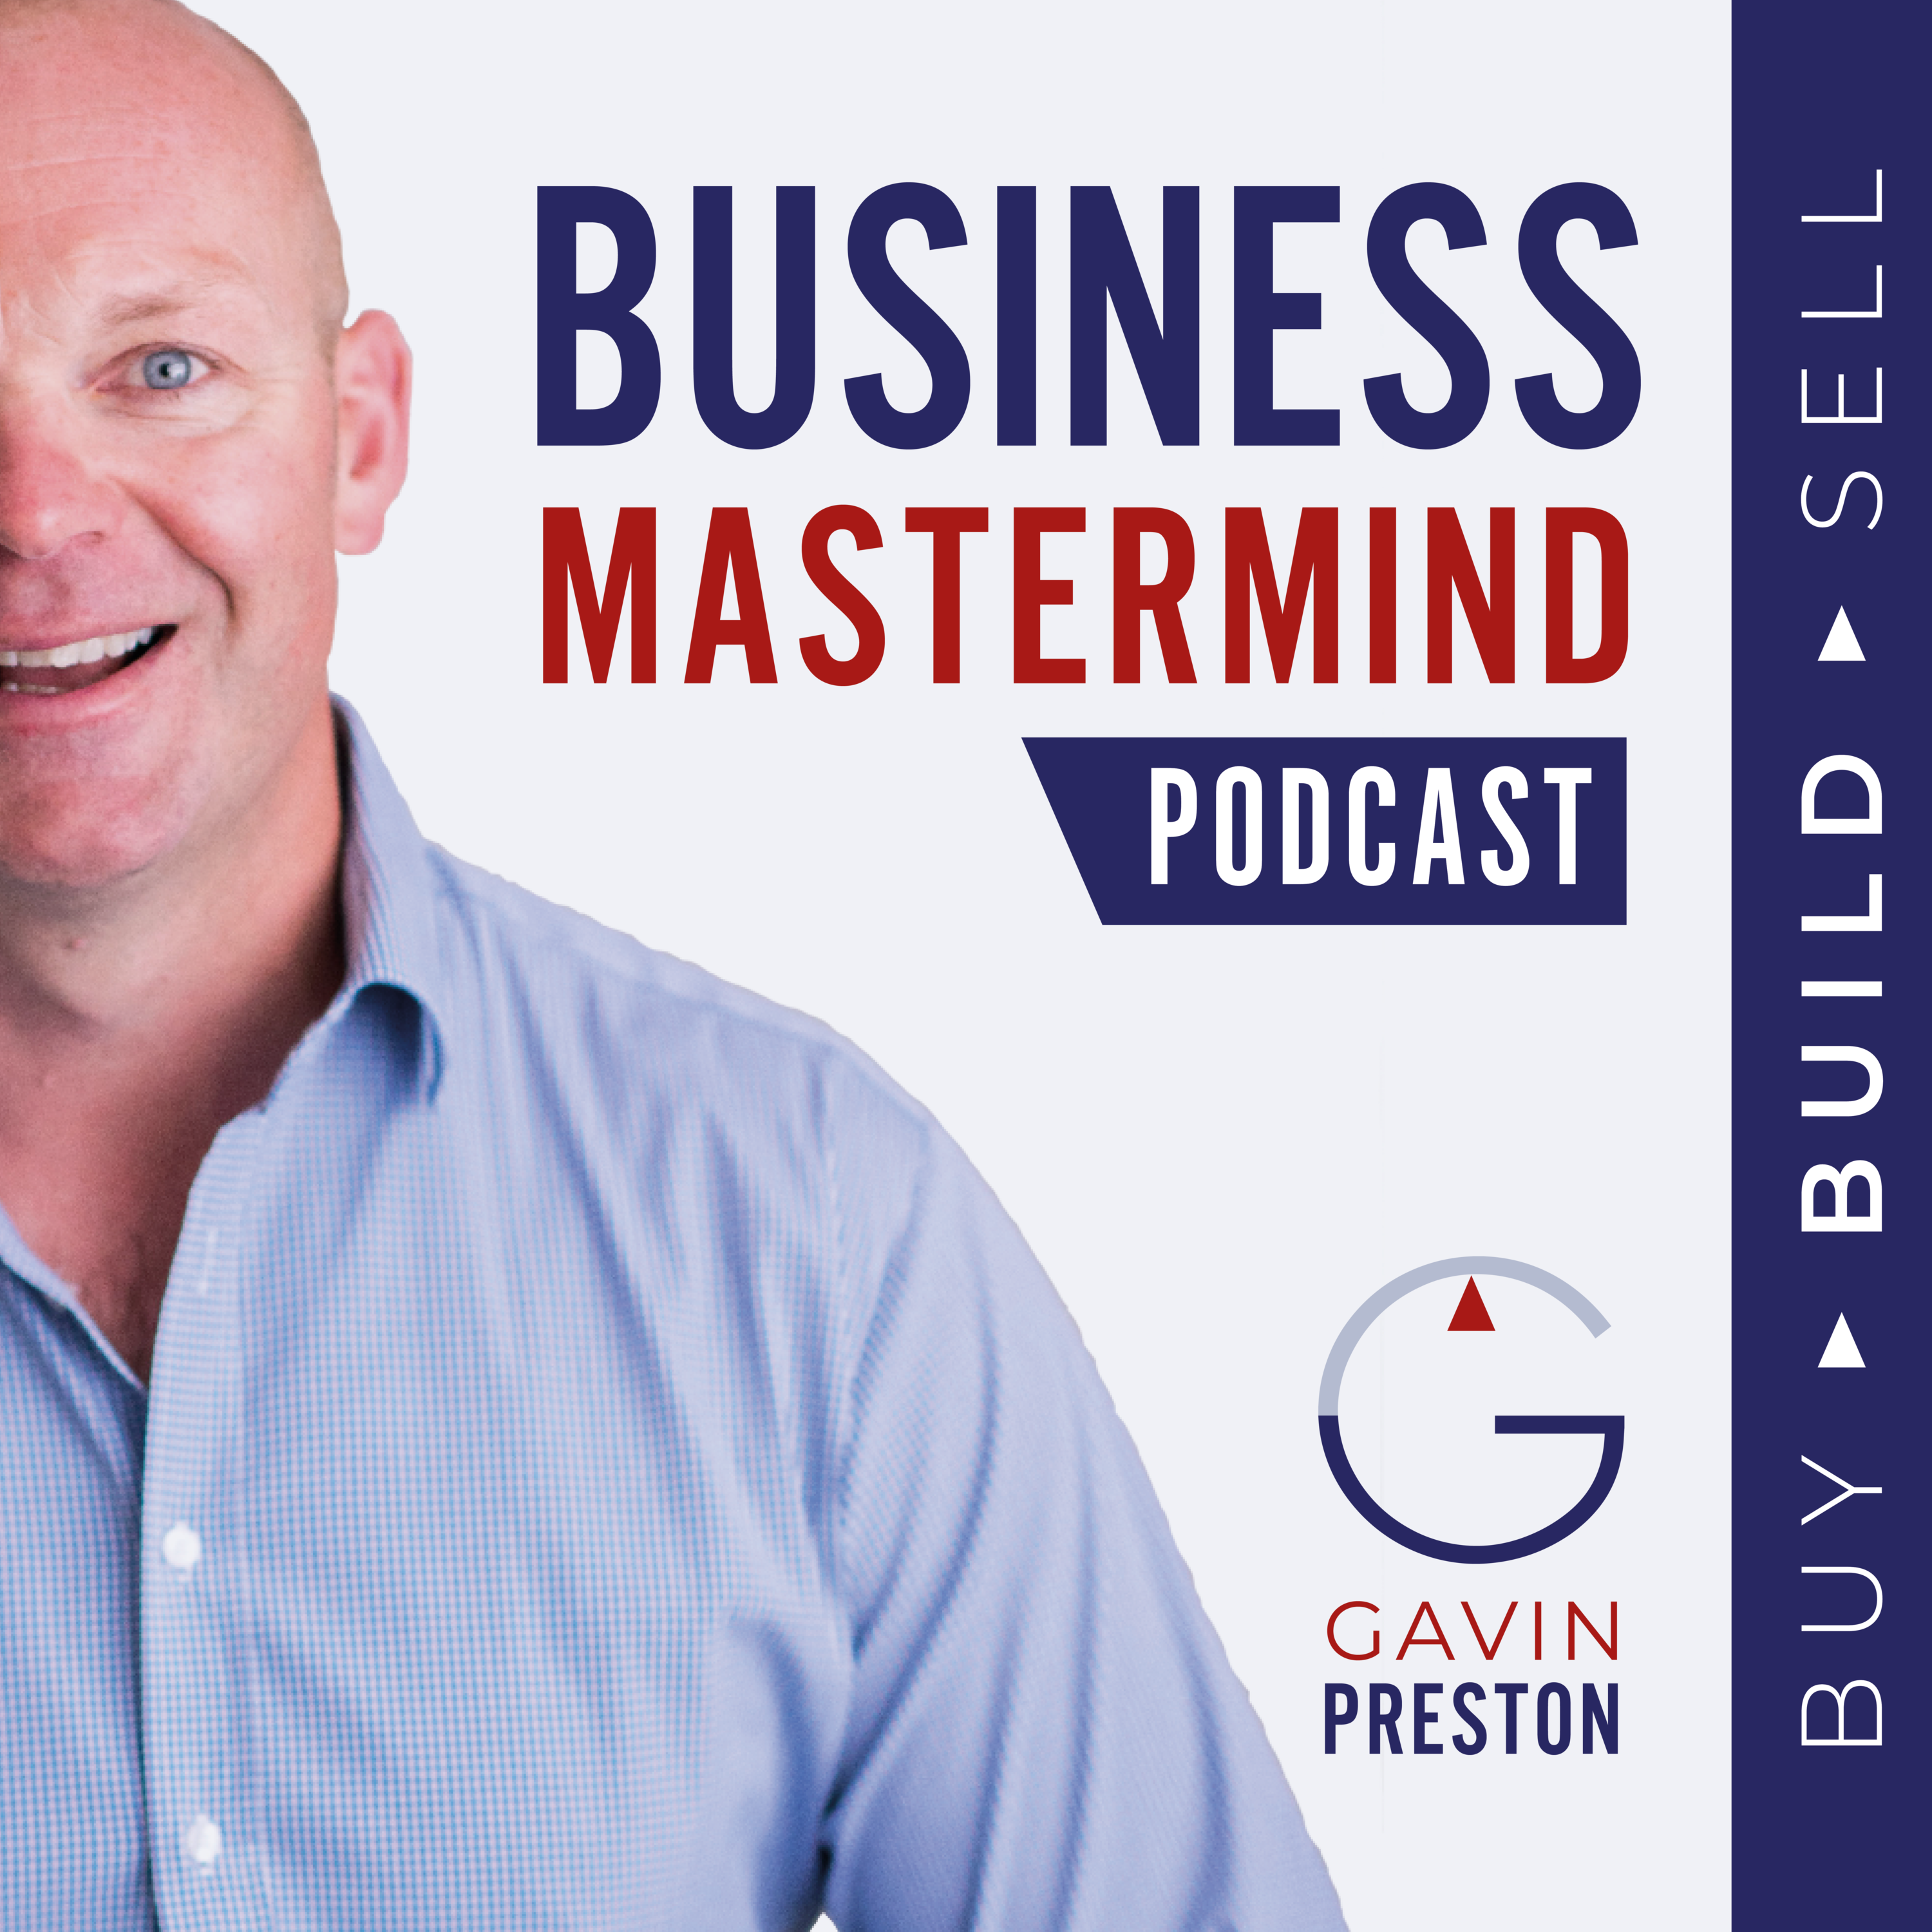 Hey Presto! Donald Moore on becoming a B Corp and business being a force for Good.